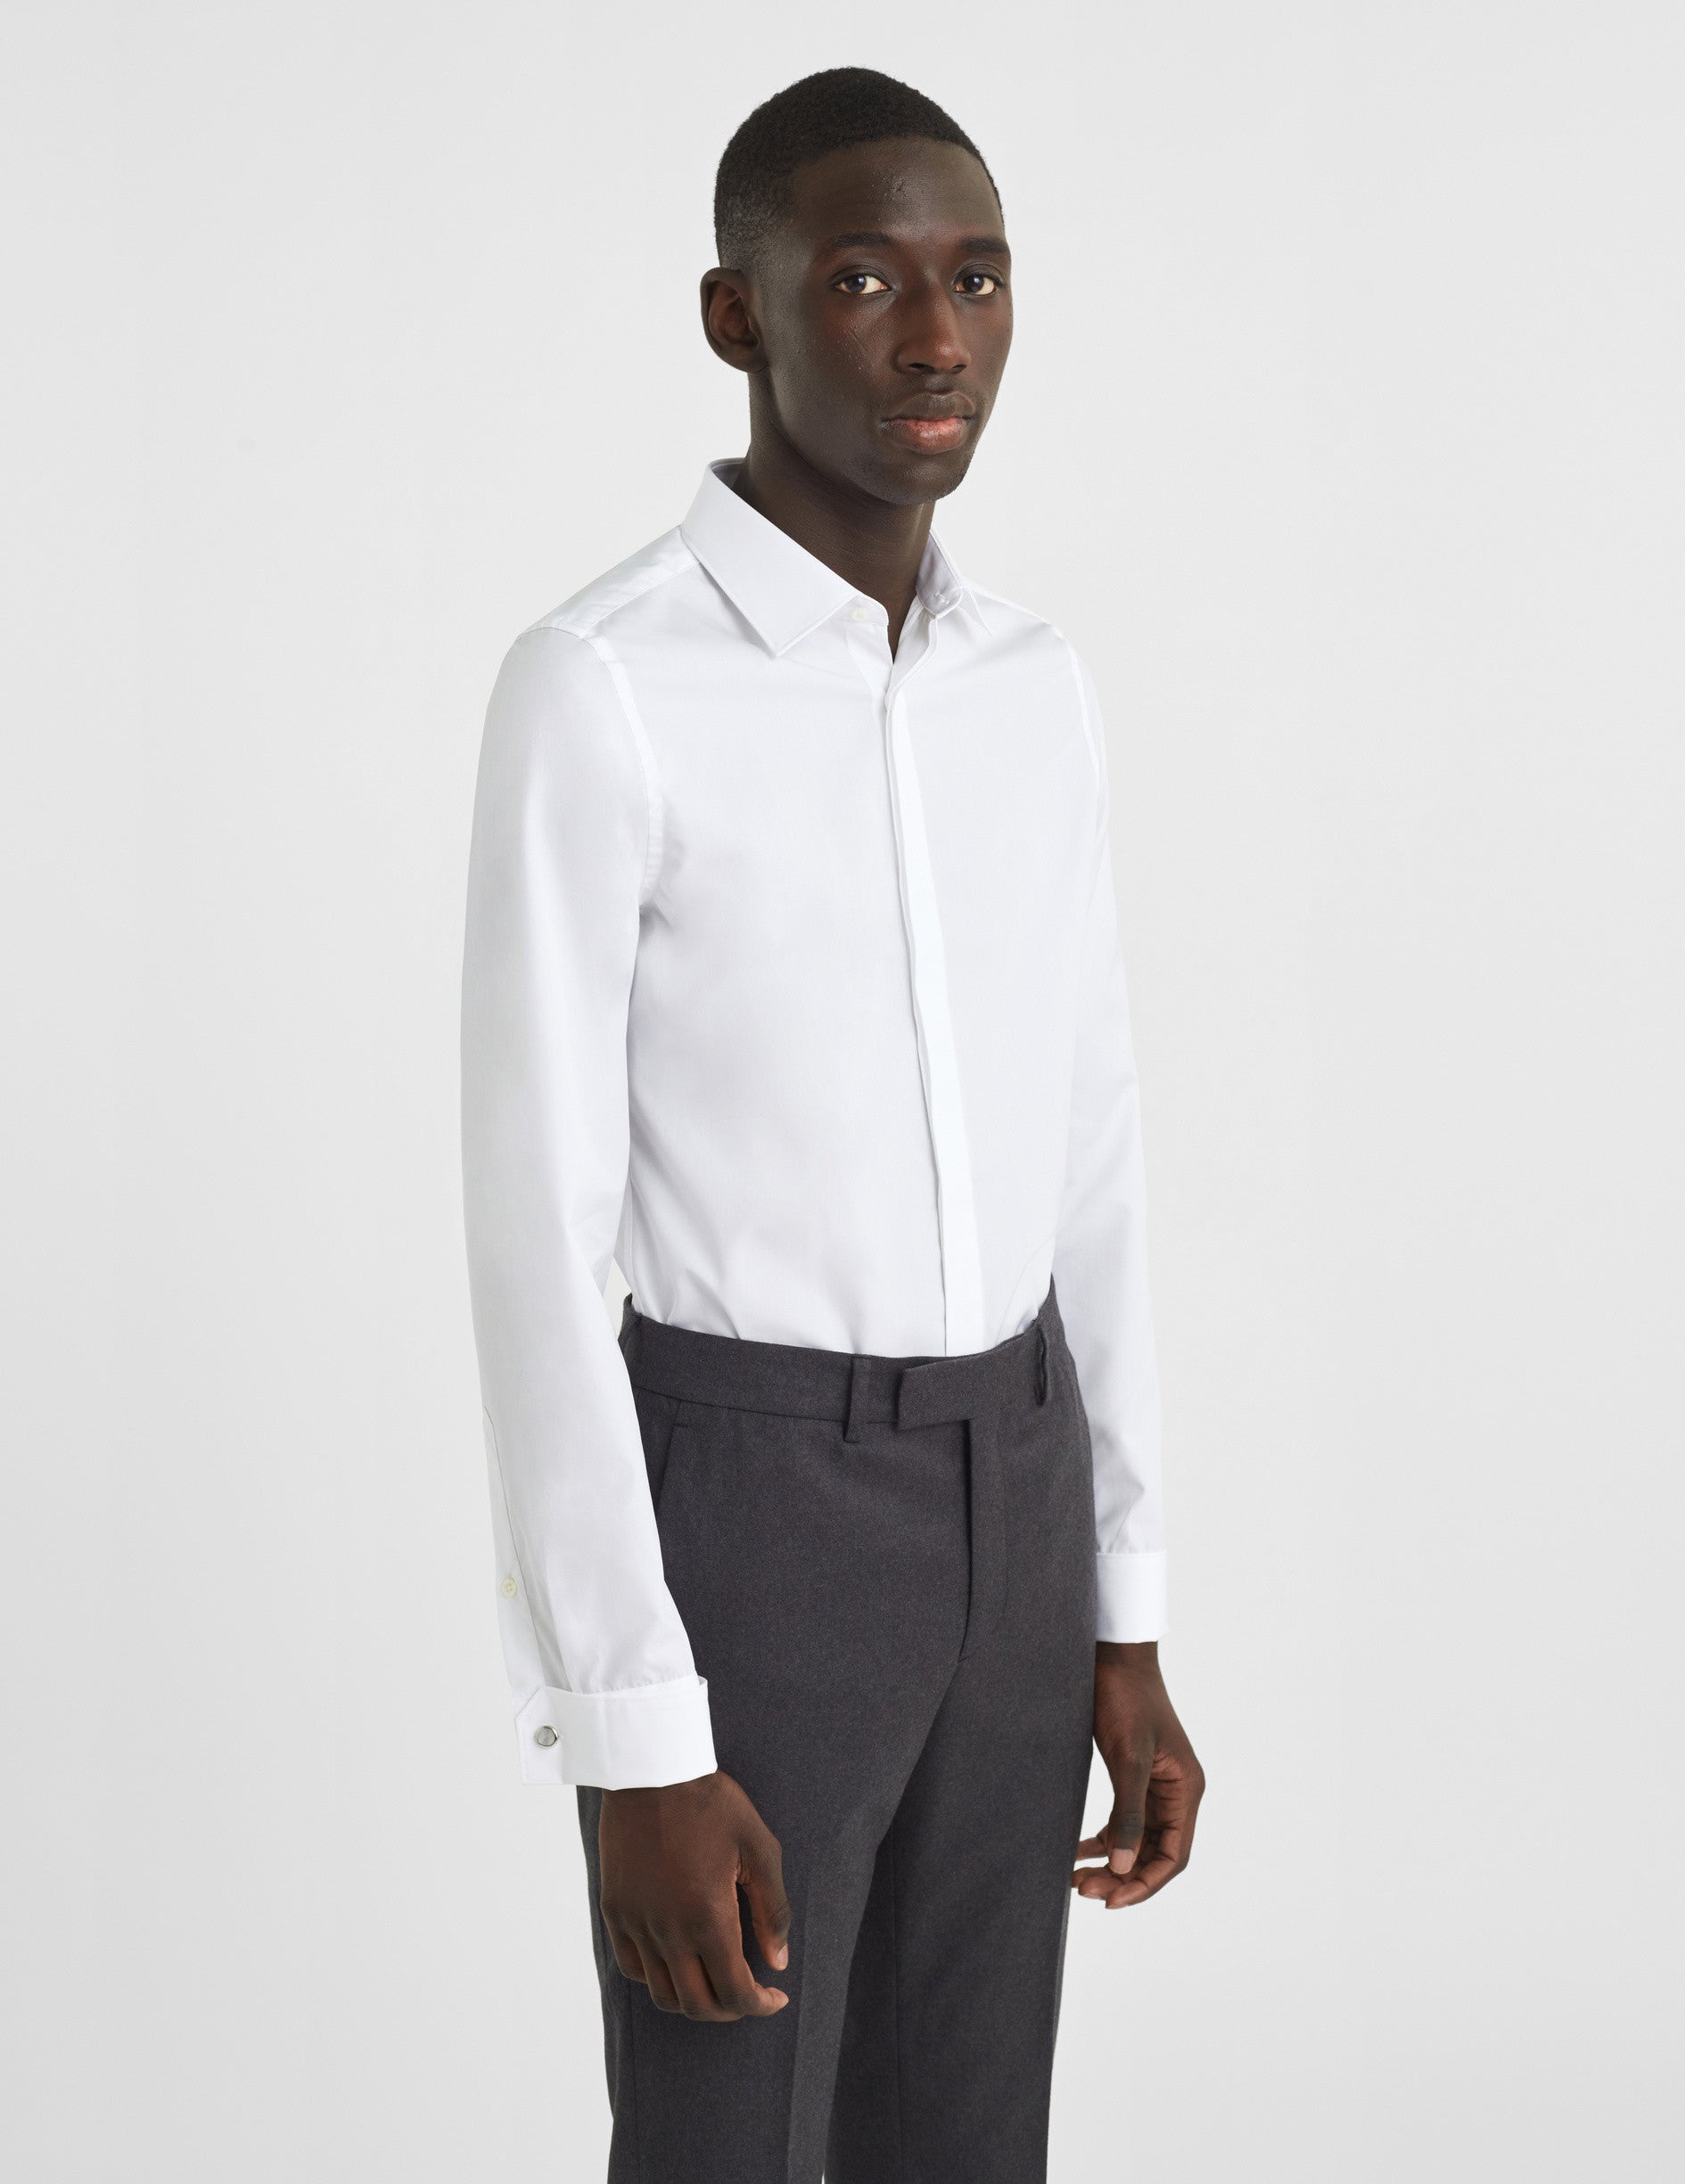 Fitted white concealed throat shirt - Poplin - Figaret Collar - French Cuffs